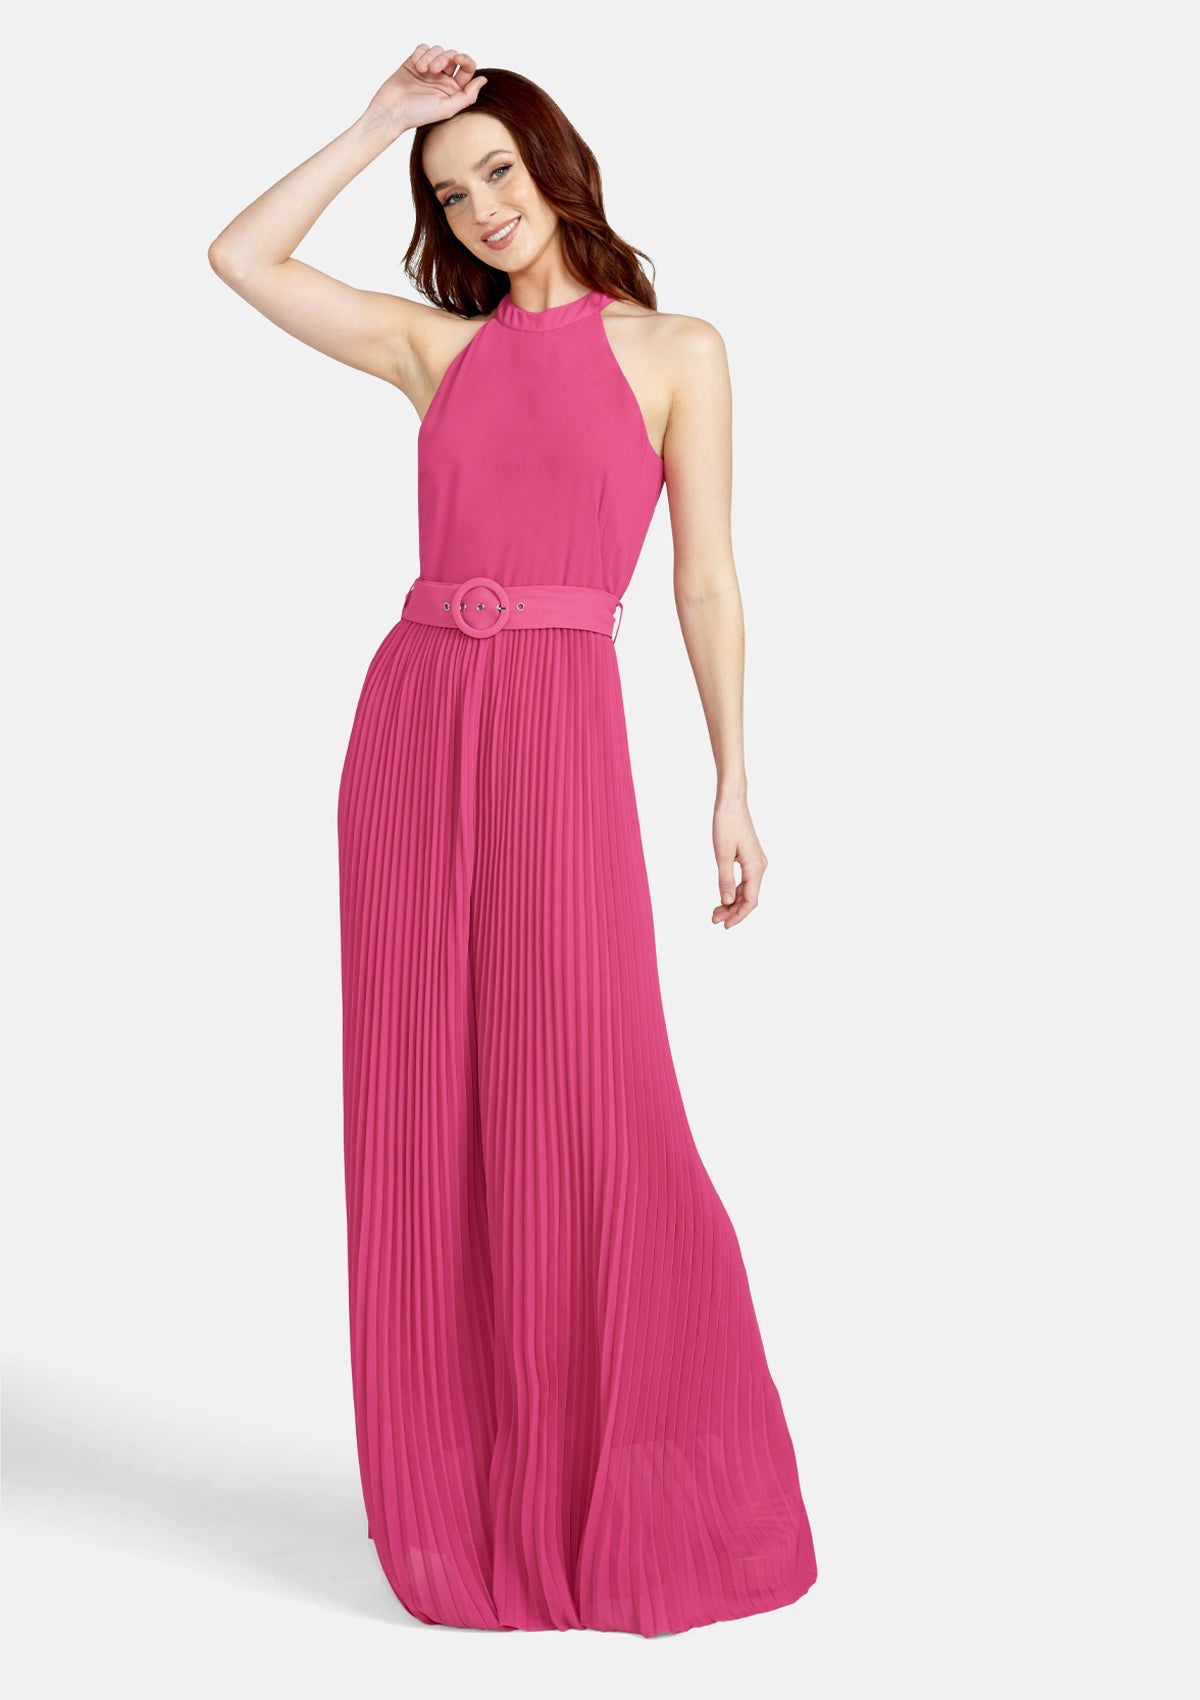 Alloy Apparel Tall Zandaya Pleated Wide Leg Jumpsuit for Women in Fuchsia Size S | Polyester